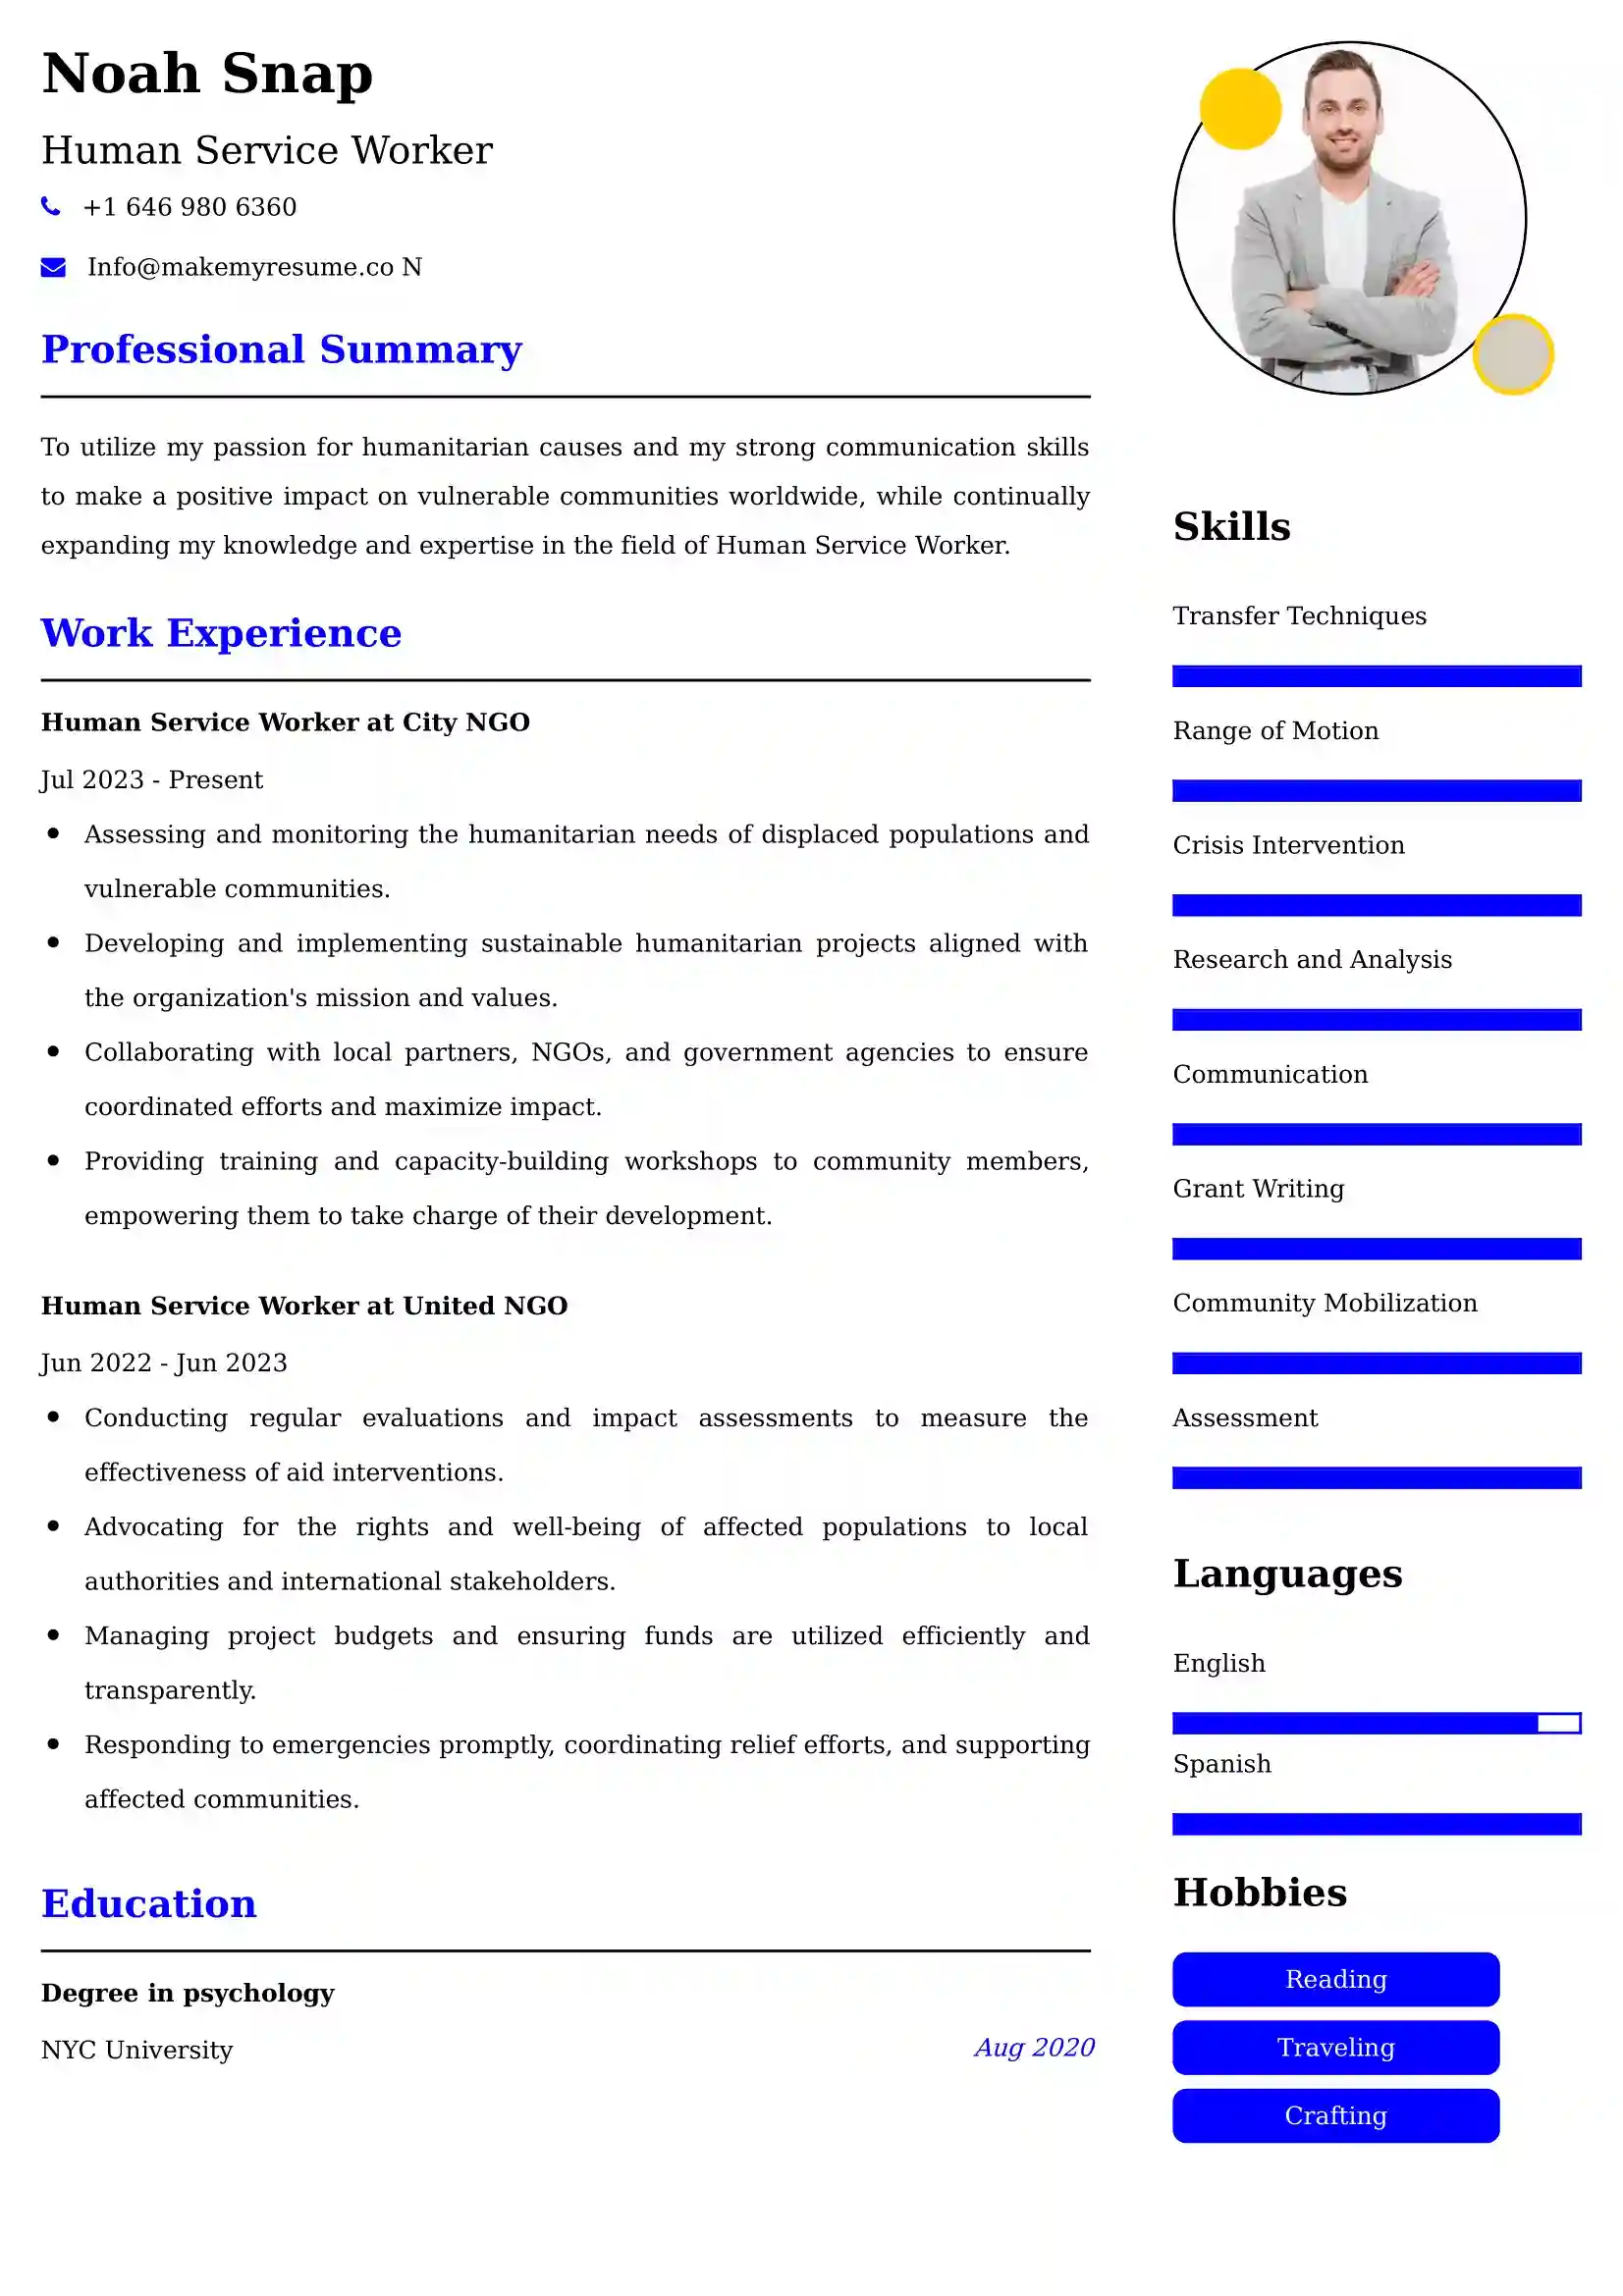 Human Service Worker CV Examples - US Format